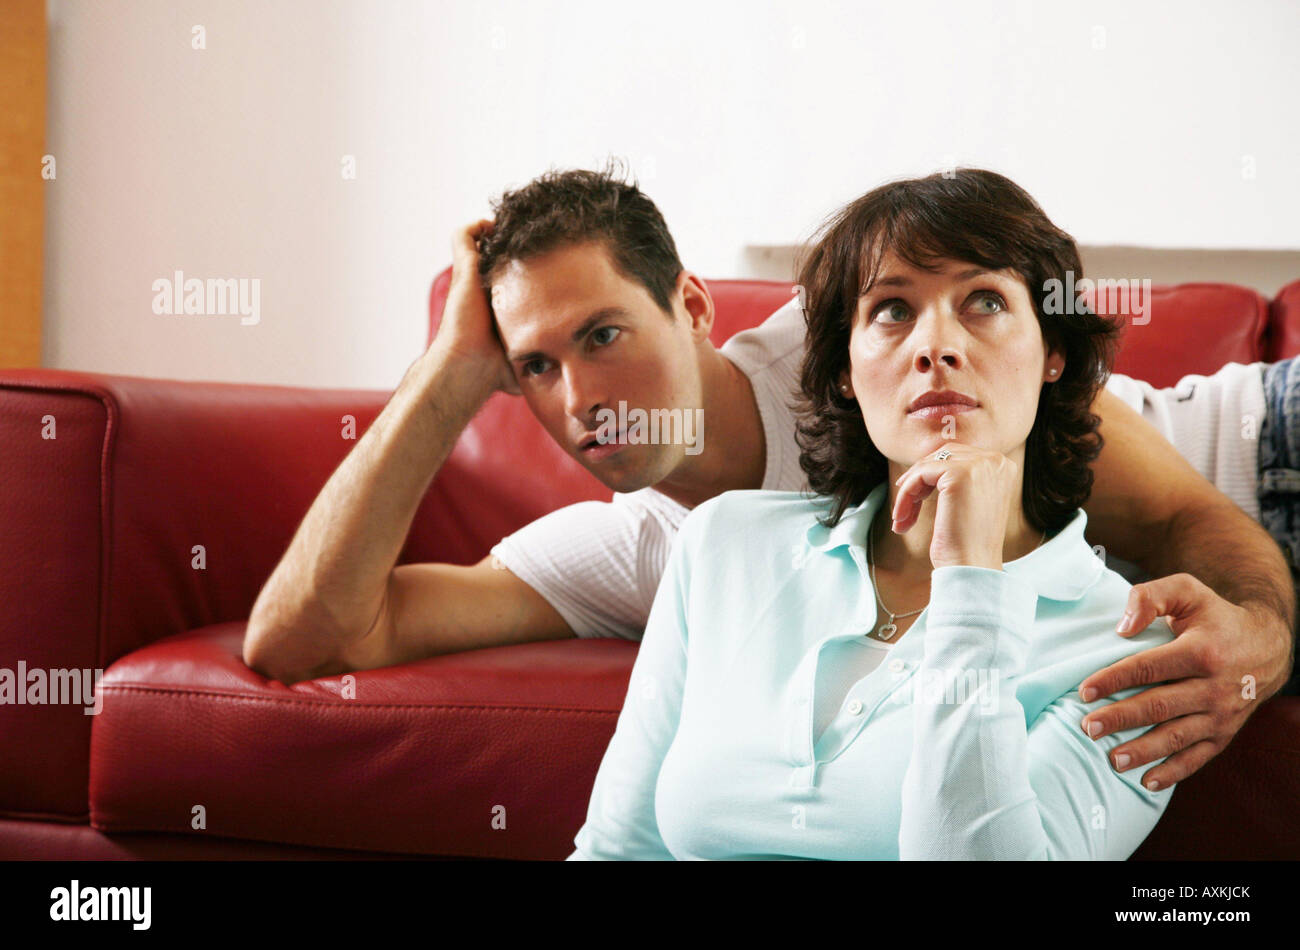 Symbols of Partnership A young woman tries to tell her partner something while he is watching tv Stock Photo